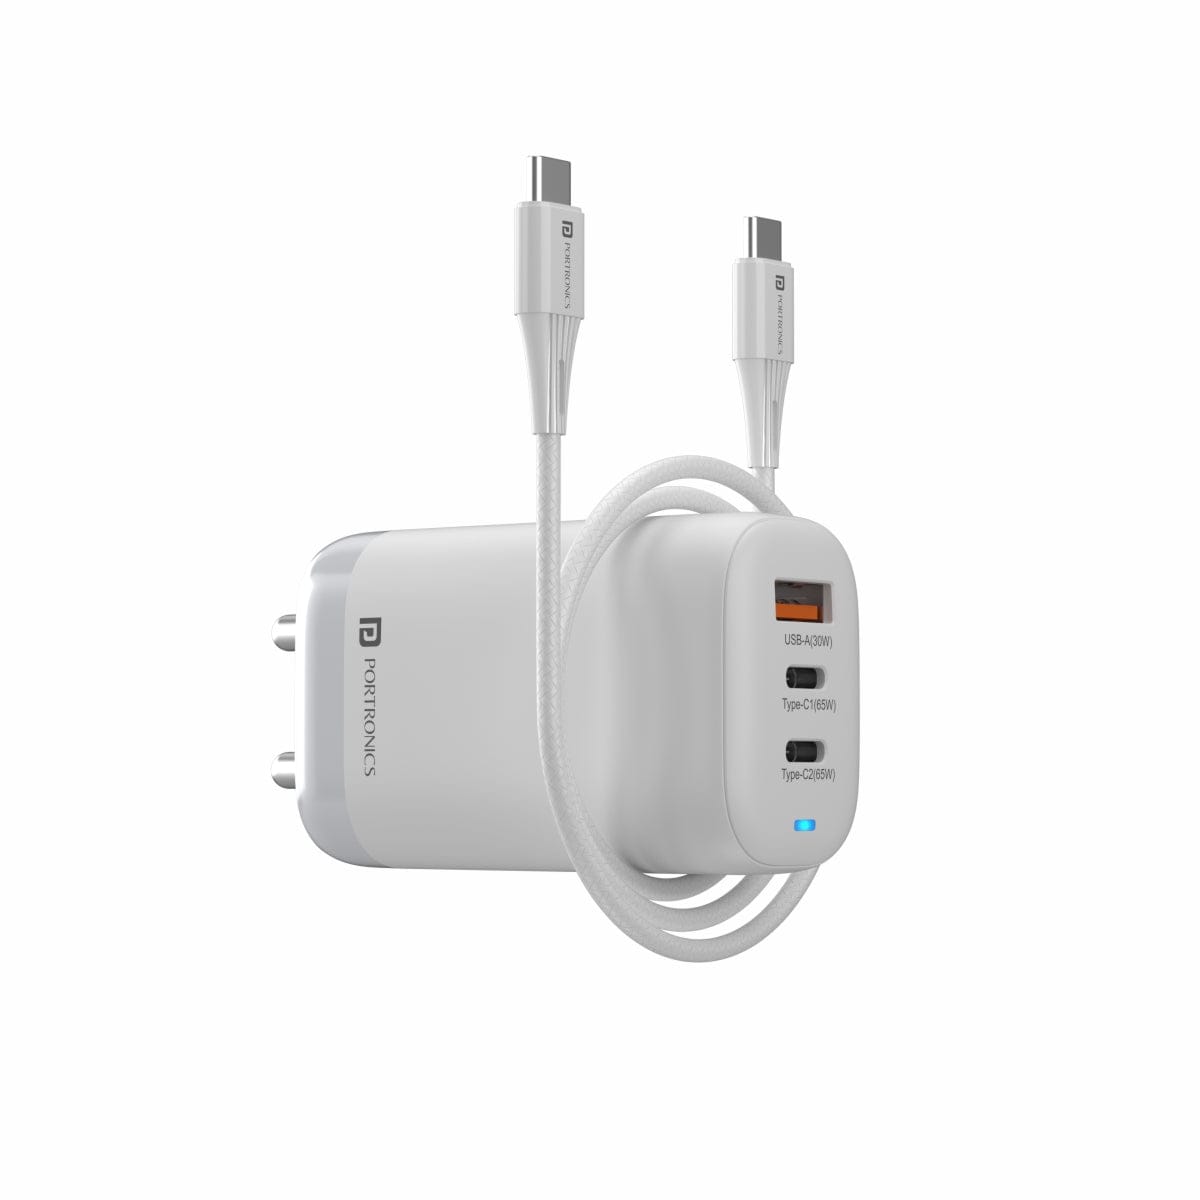 PORTRONICS-Adapto 65X Charger Your Laptops & Mobile